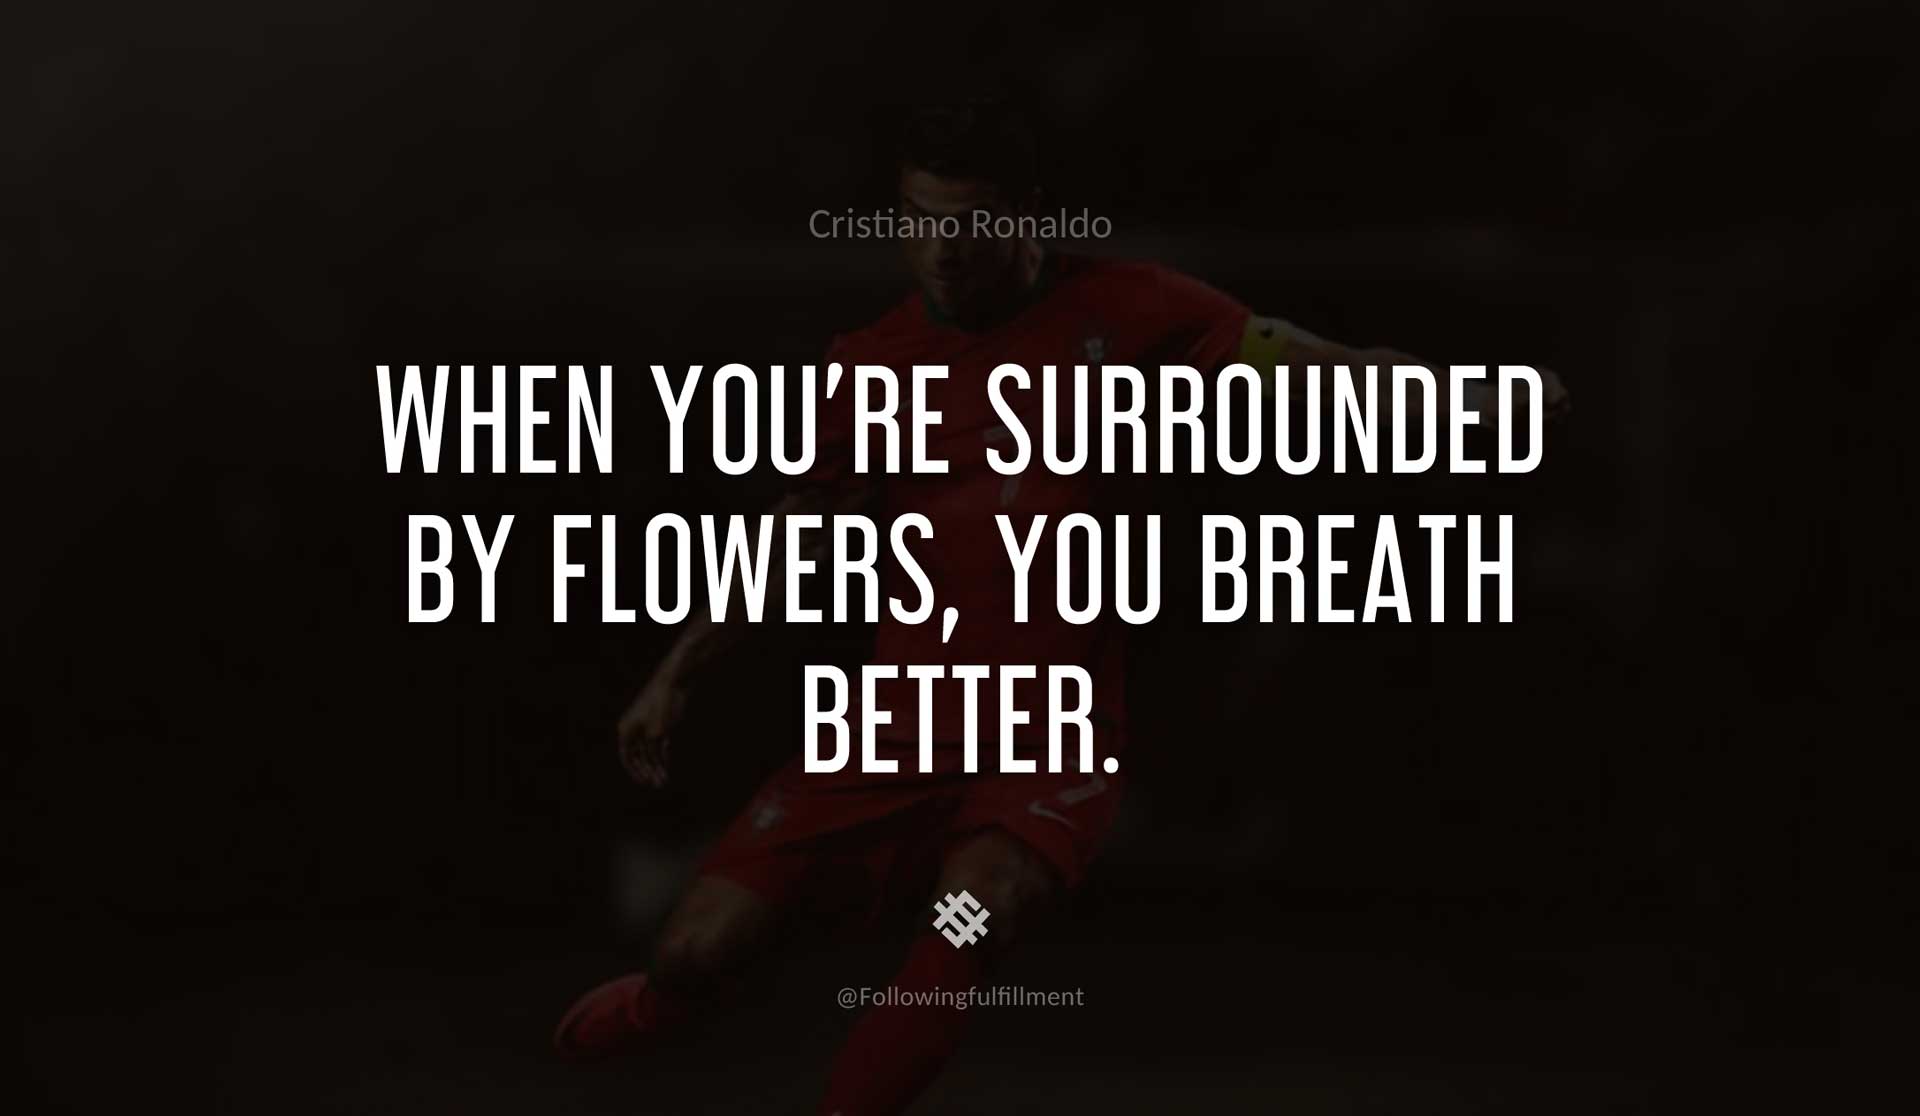 When-you're-surrounded-by-flowers,-you-breath-better.-CRISTIANO-RONALDO-Quote.jpg